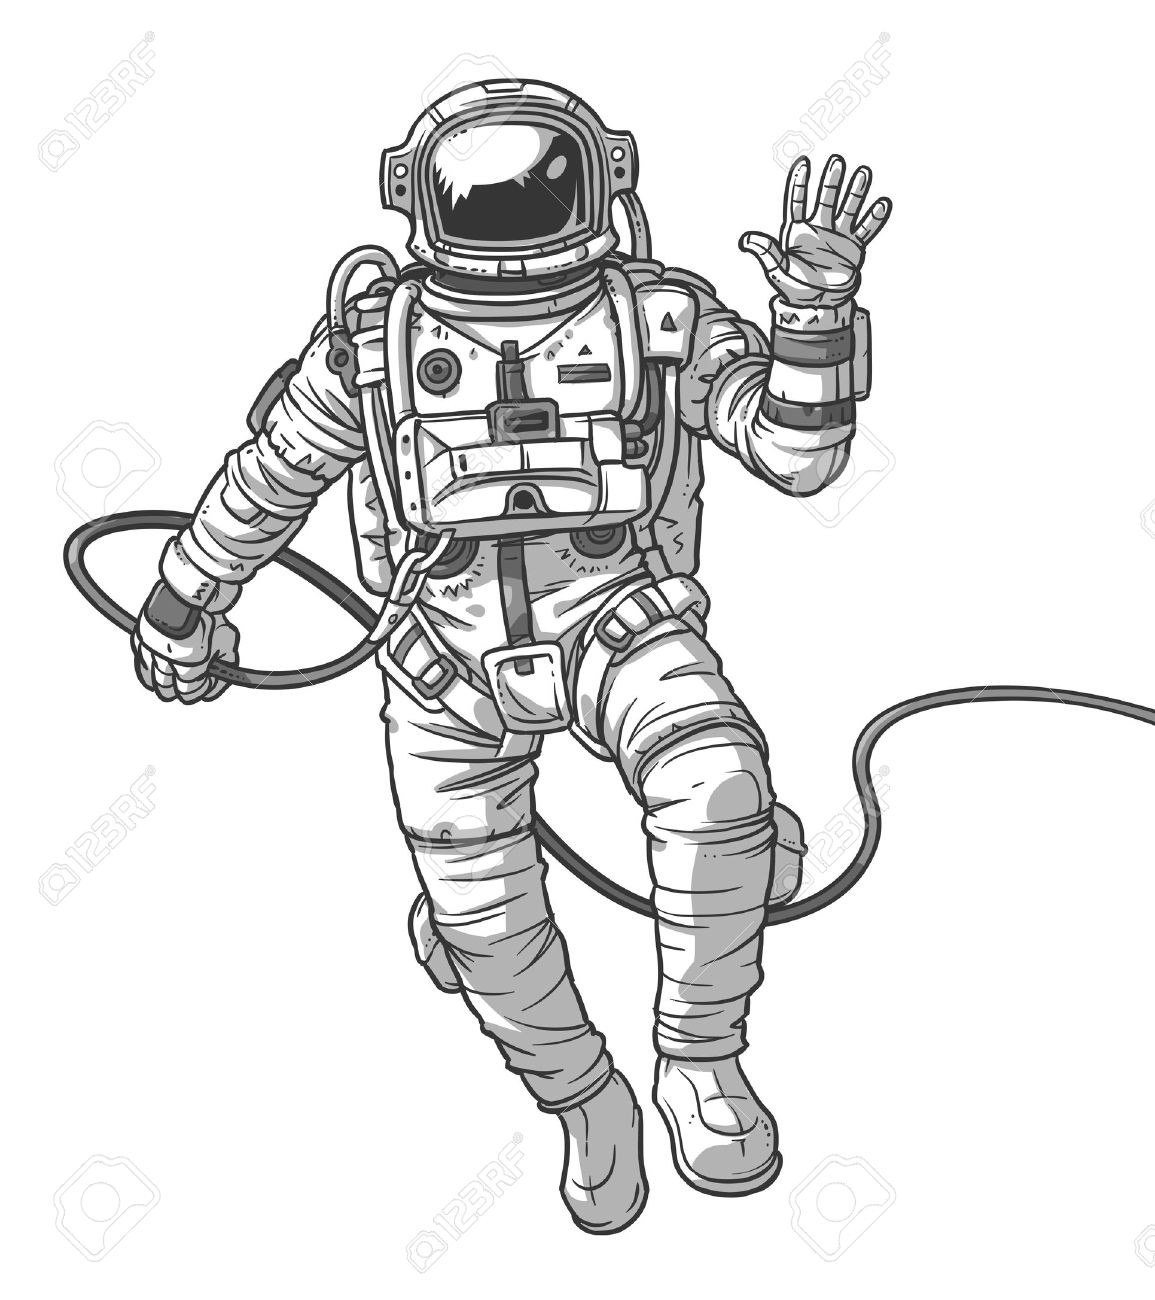 Space Suit Drawing - Space Suit Drawing At Getdrawings | Bodenfwasu